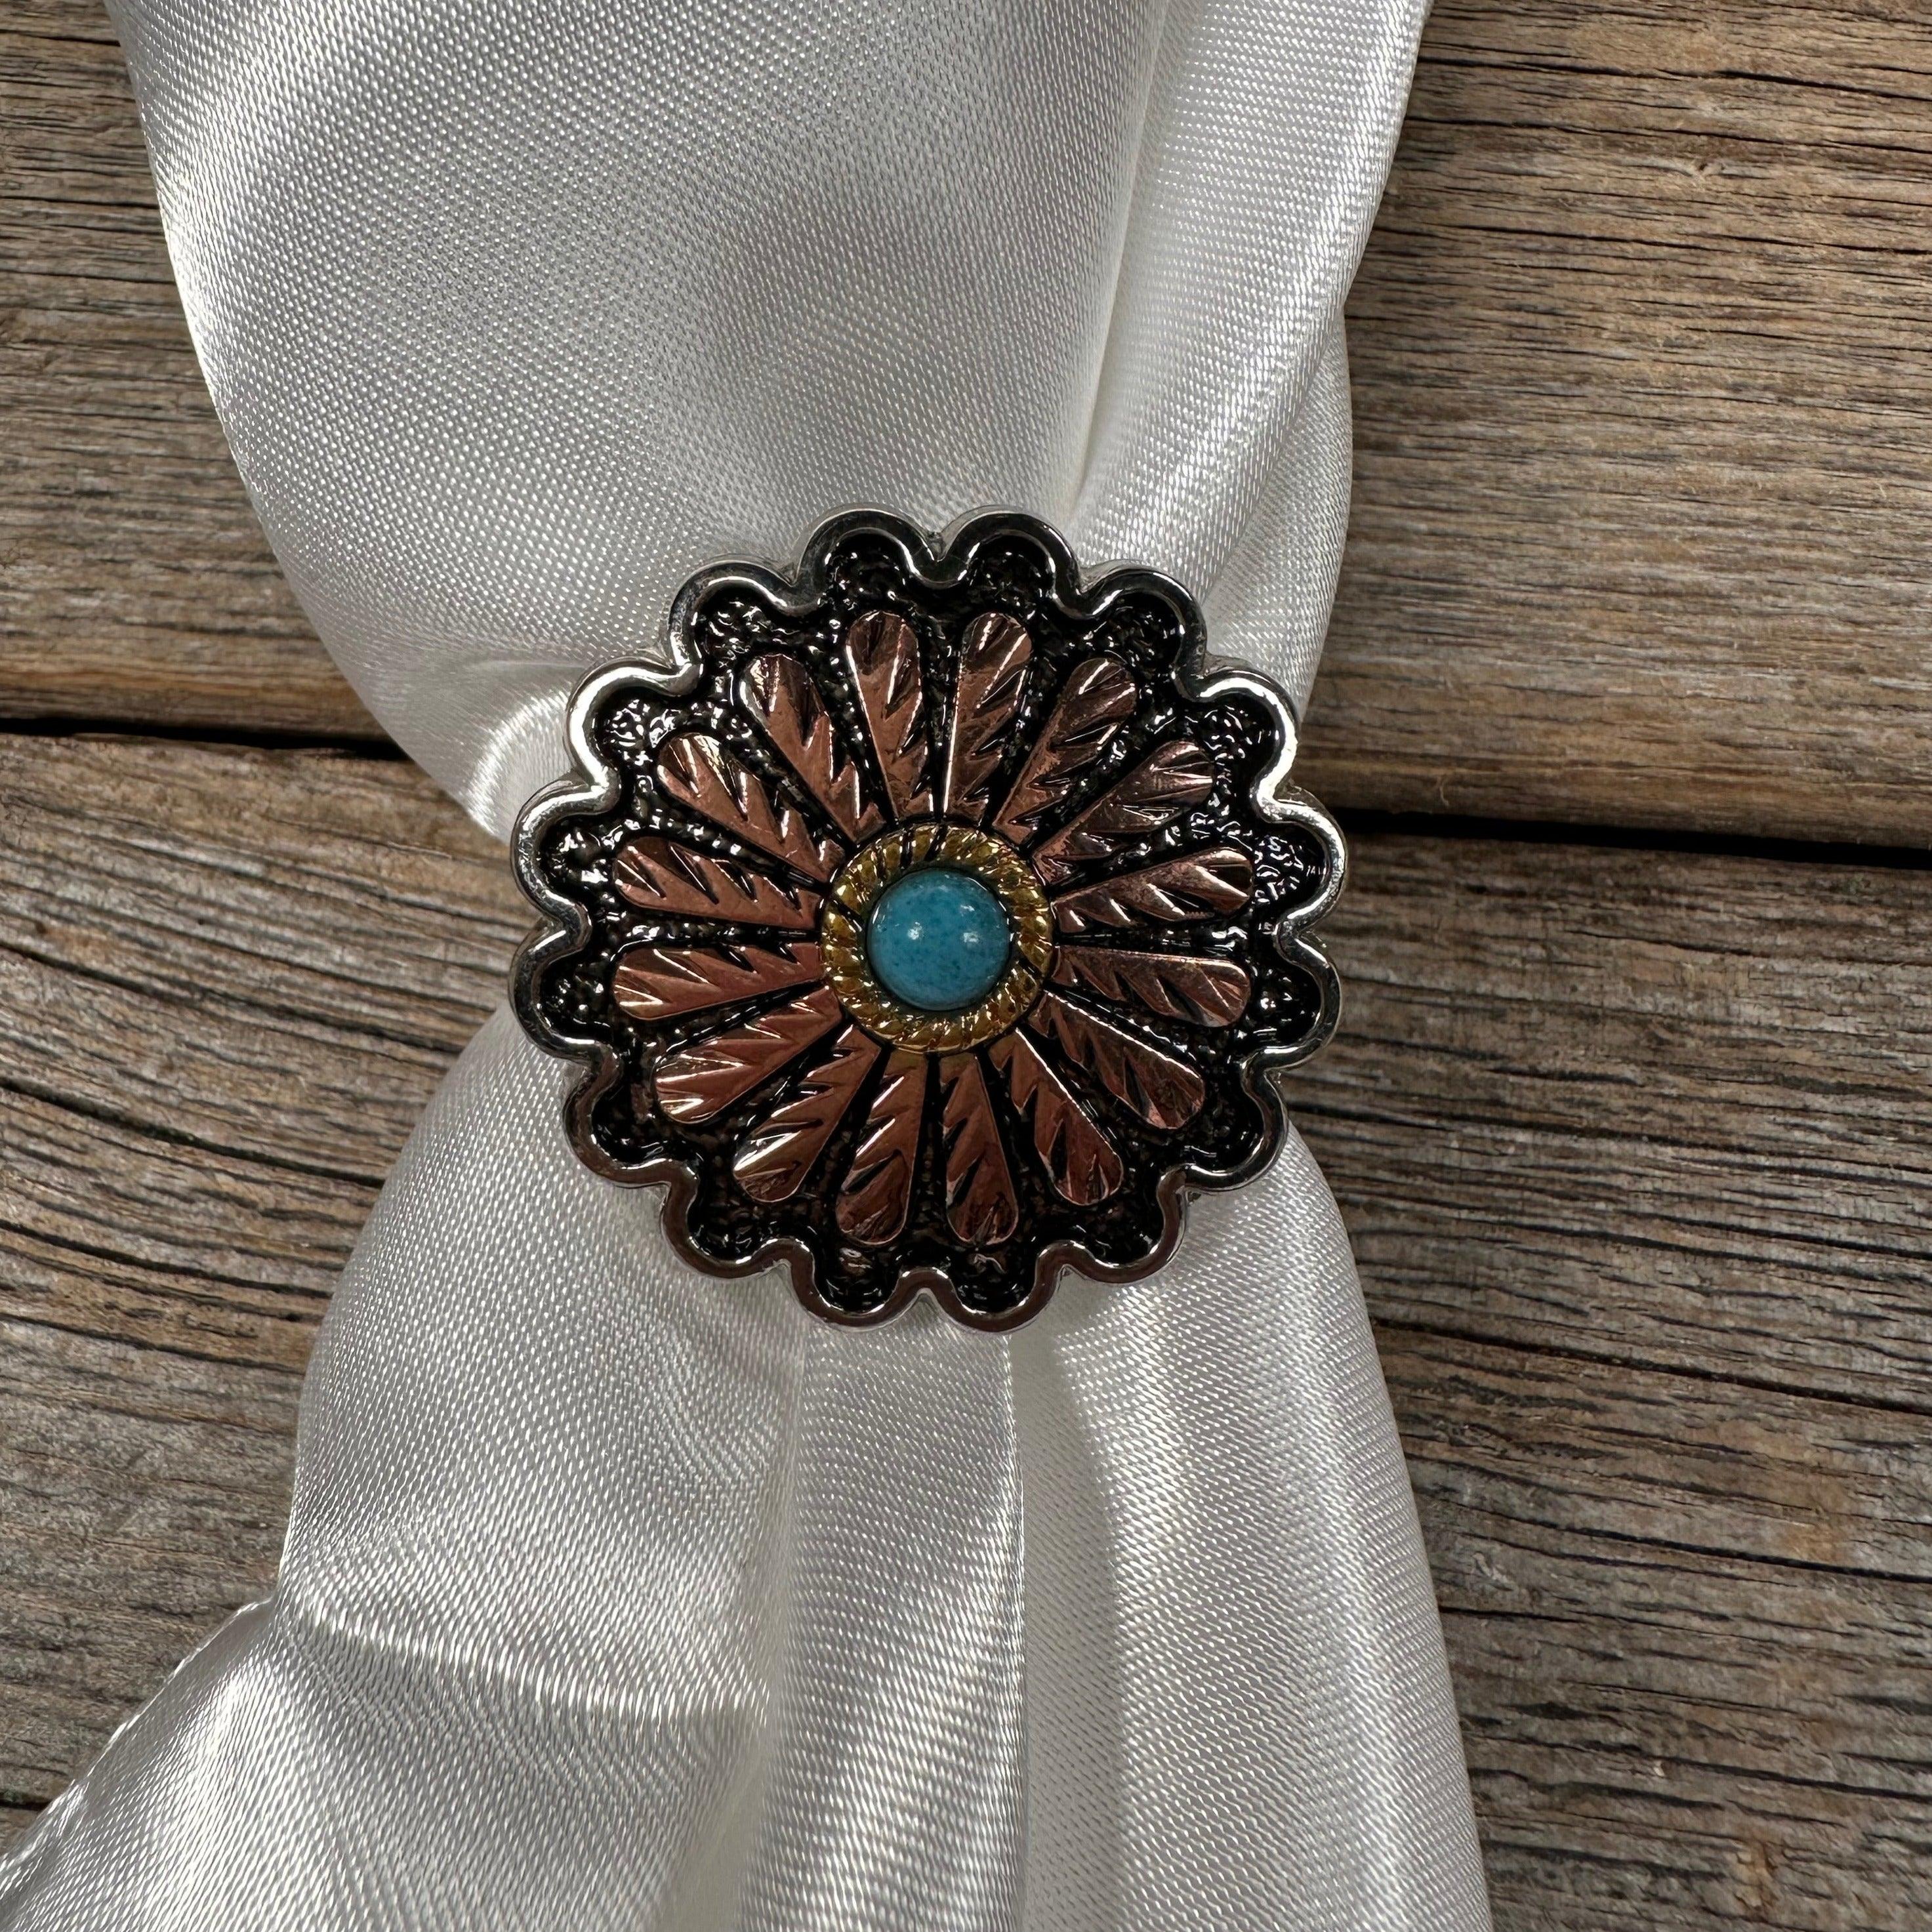 Antique Silver and Copper Flower Western Wild Rag Slide #WRSW220 - RODEO DRIVE